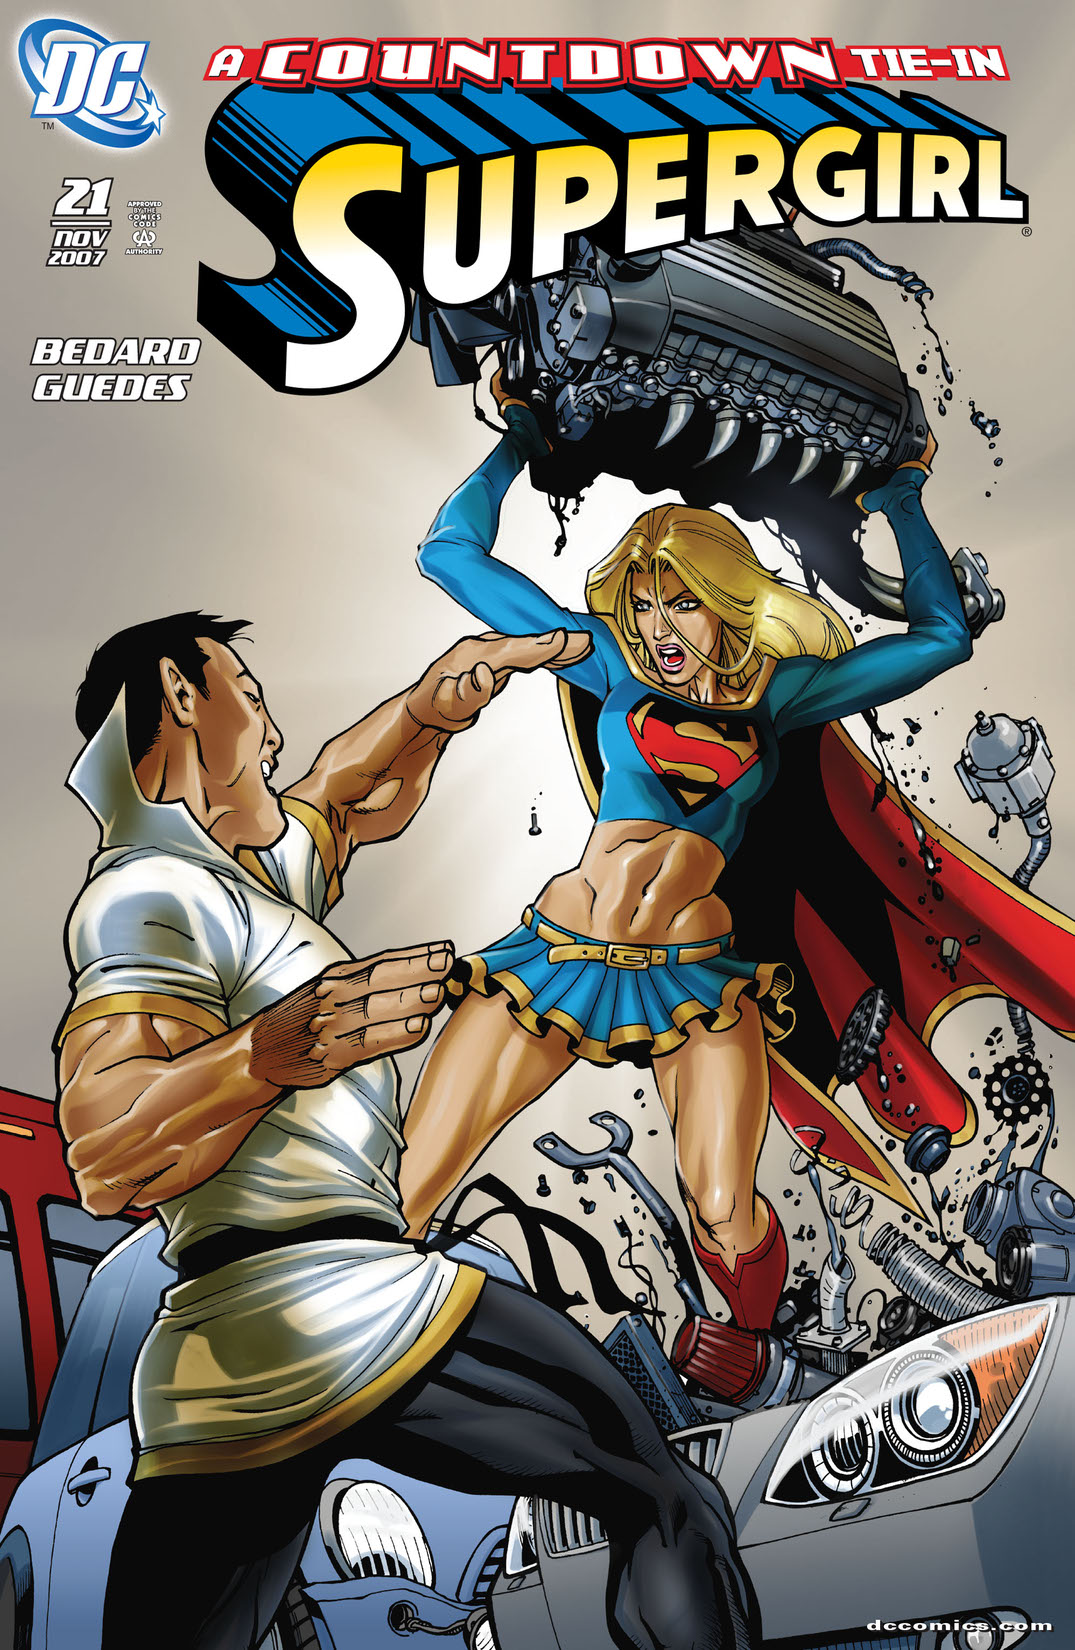 Supergirl (2005-) #21 preview images